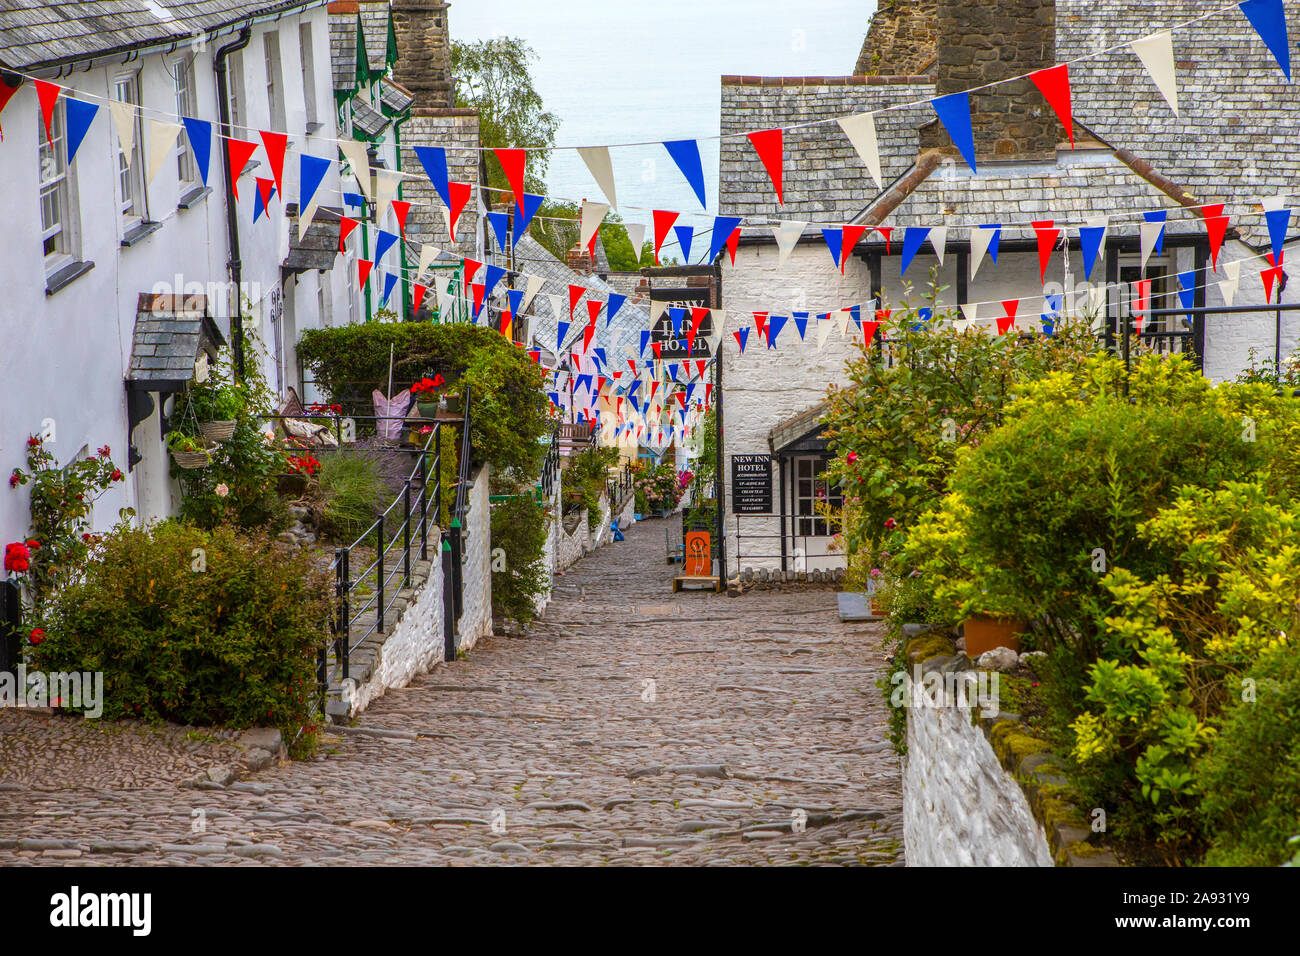 Devon, UK - August 2nd 2019: A view down the picturesque cobbled main street of the fishing village of Clovelly in North Devon, UK. Stock Photo